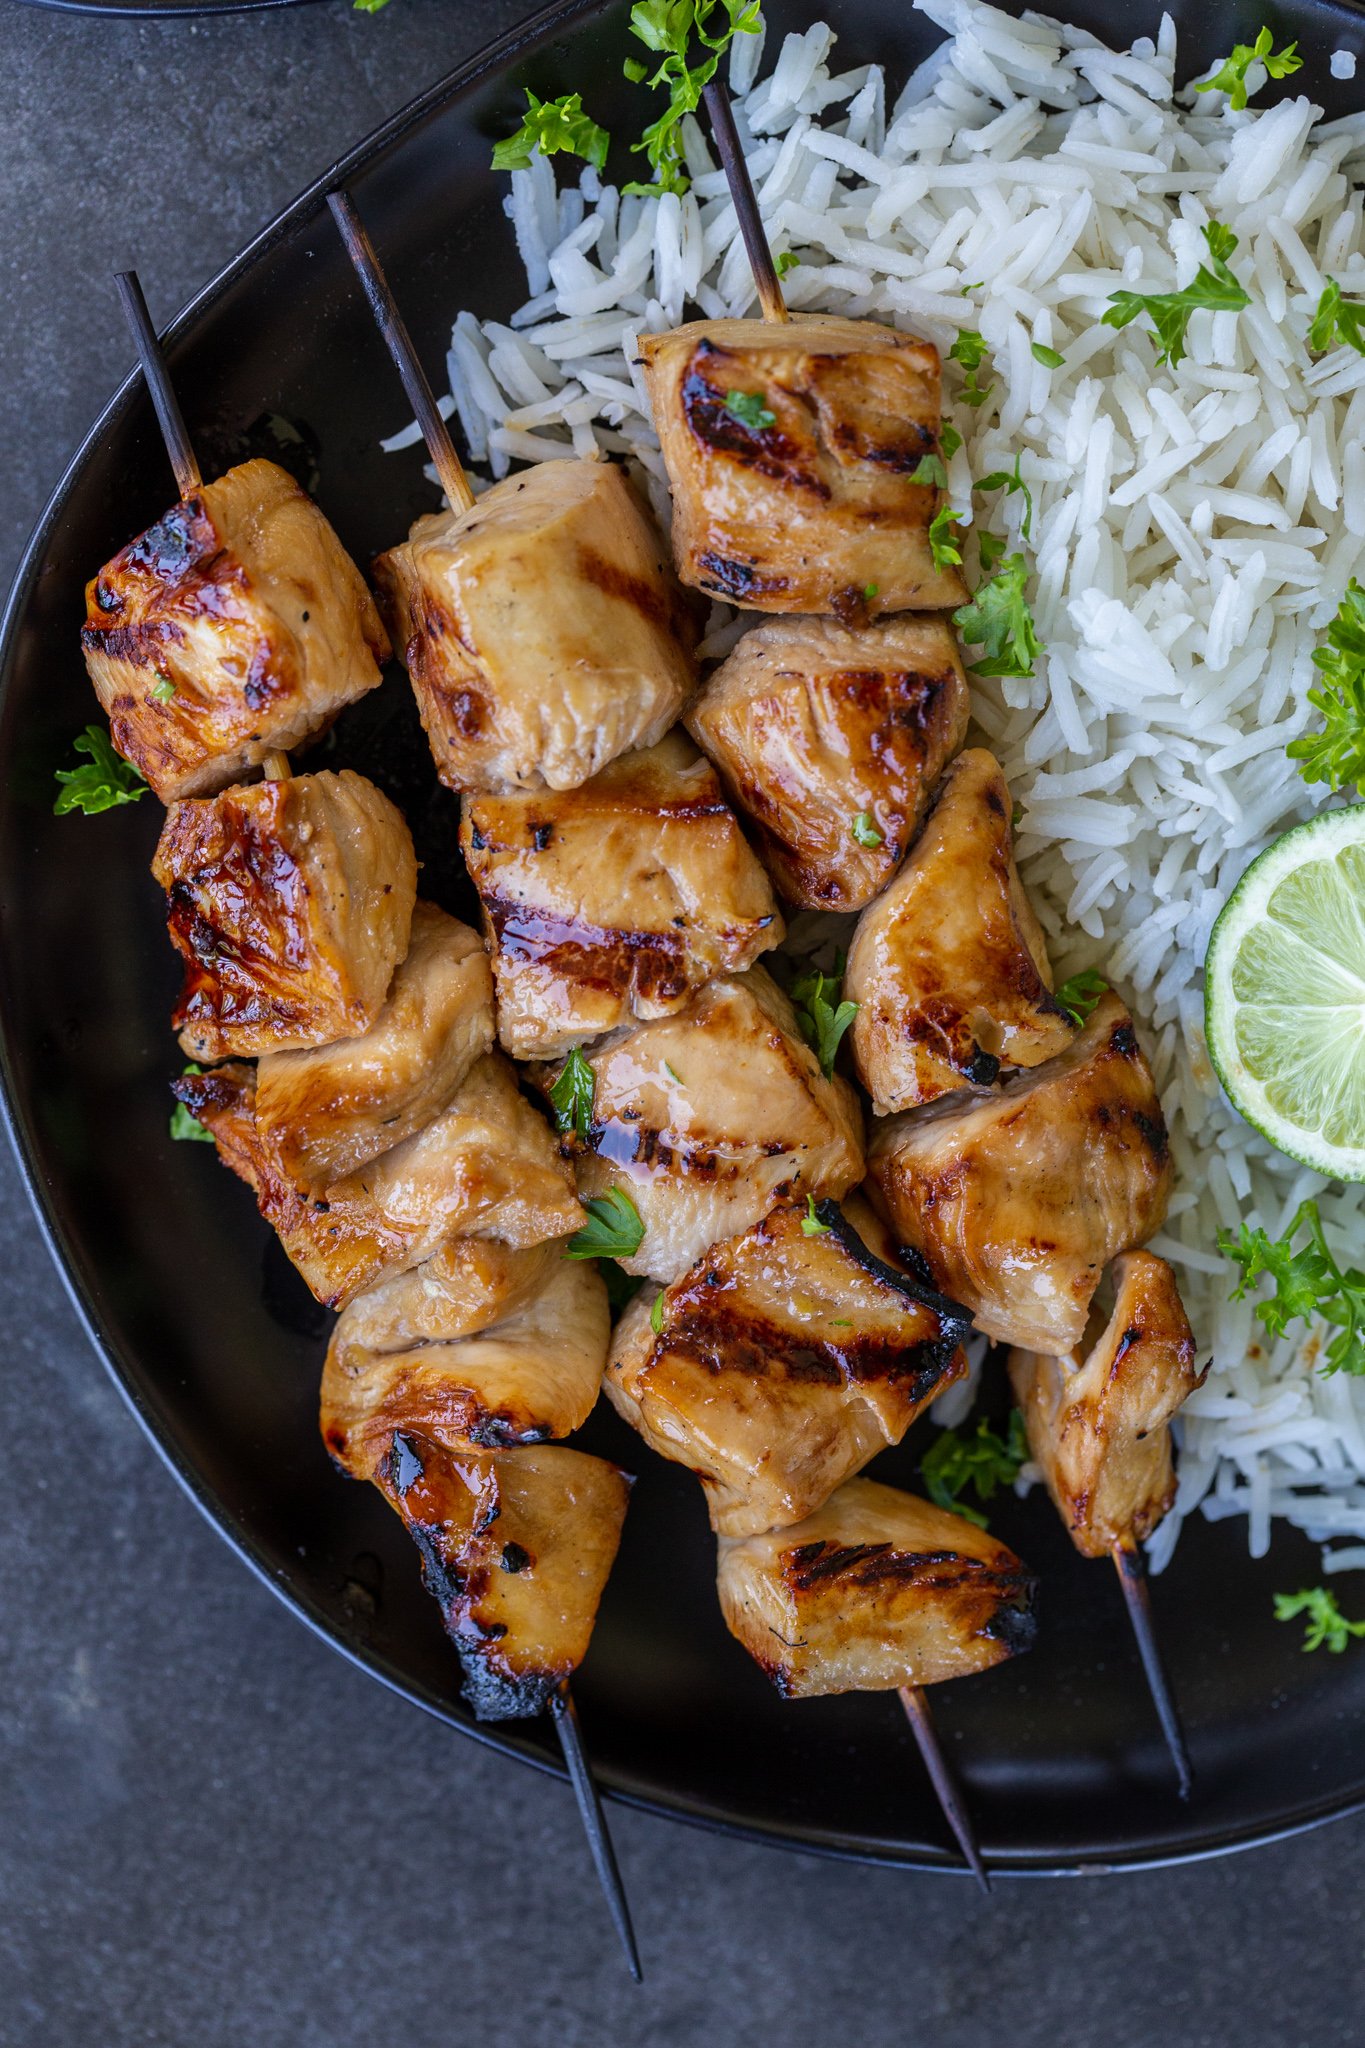 Grilled Chicken Skewers Recipe - Dumpling Connection